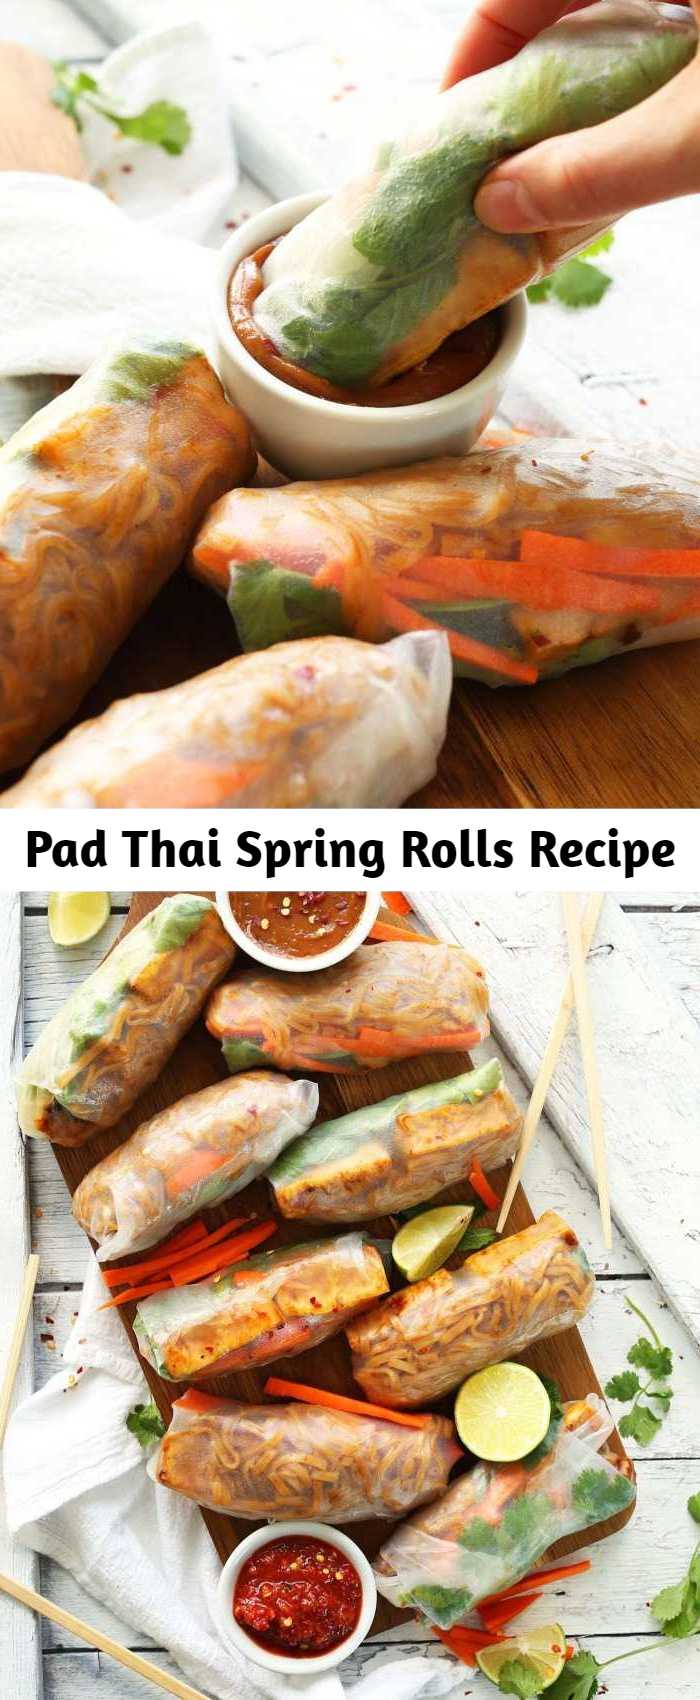 Pad Thai Spring Rolls Recipe - Amazing 10-ingredient pad Thai spring rolls with spicy-sweet noodles, crispy baked tofu, and fresh carrots and herbs! A healthier vegan, gluten free entree.